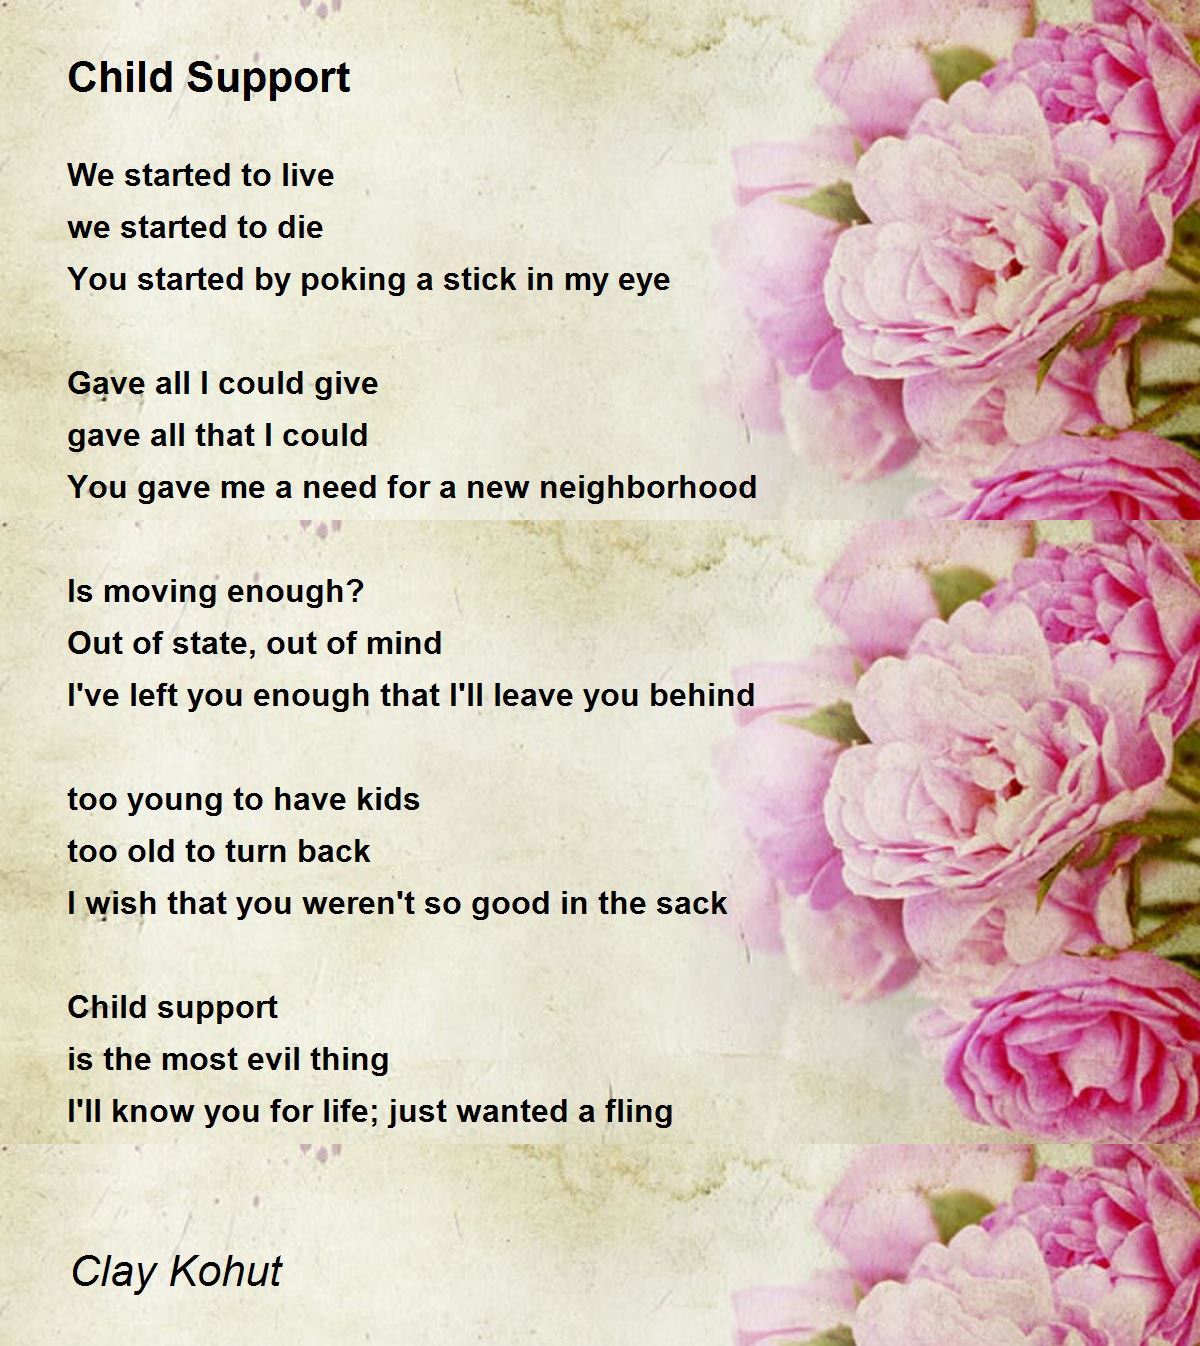 Child Support by Clay Kohut - Child Support Poem